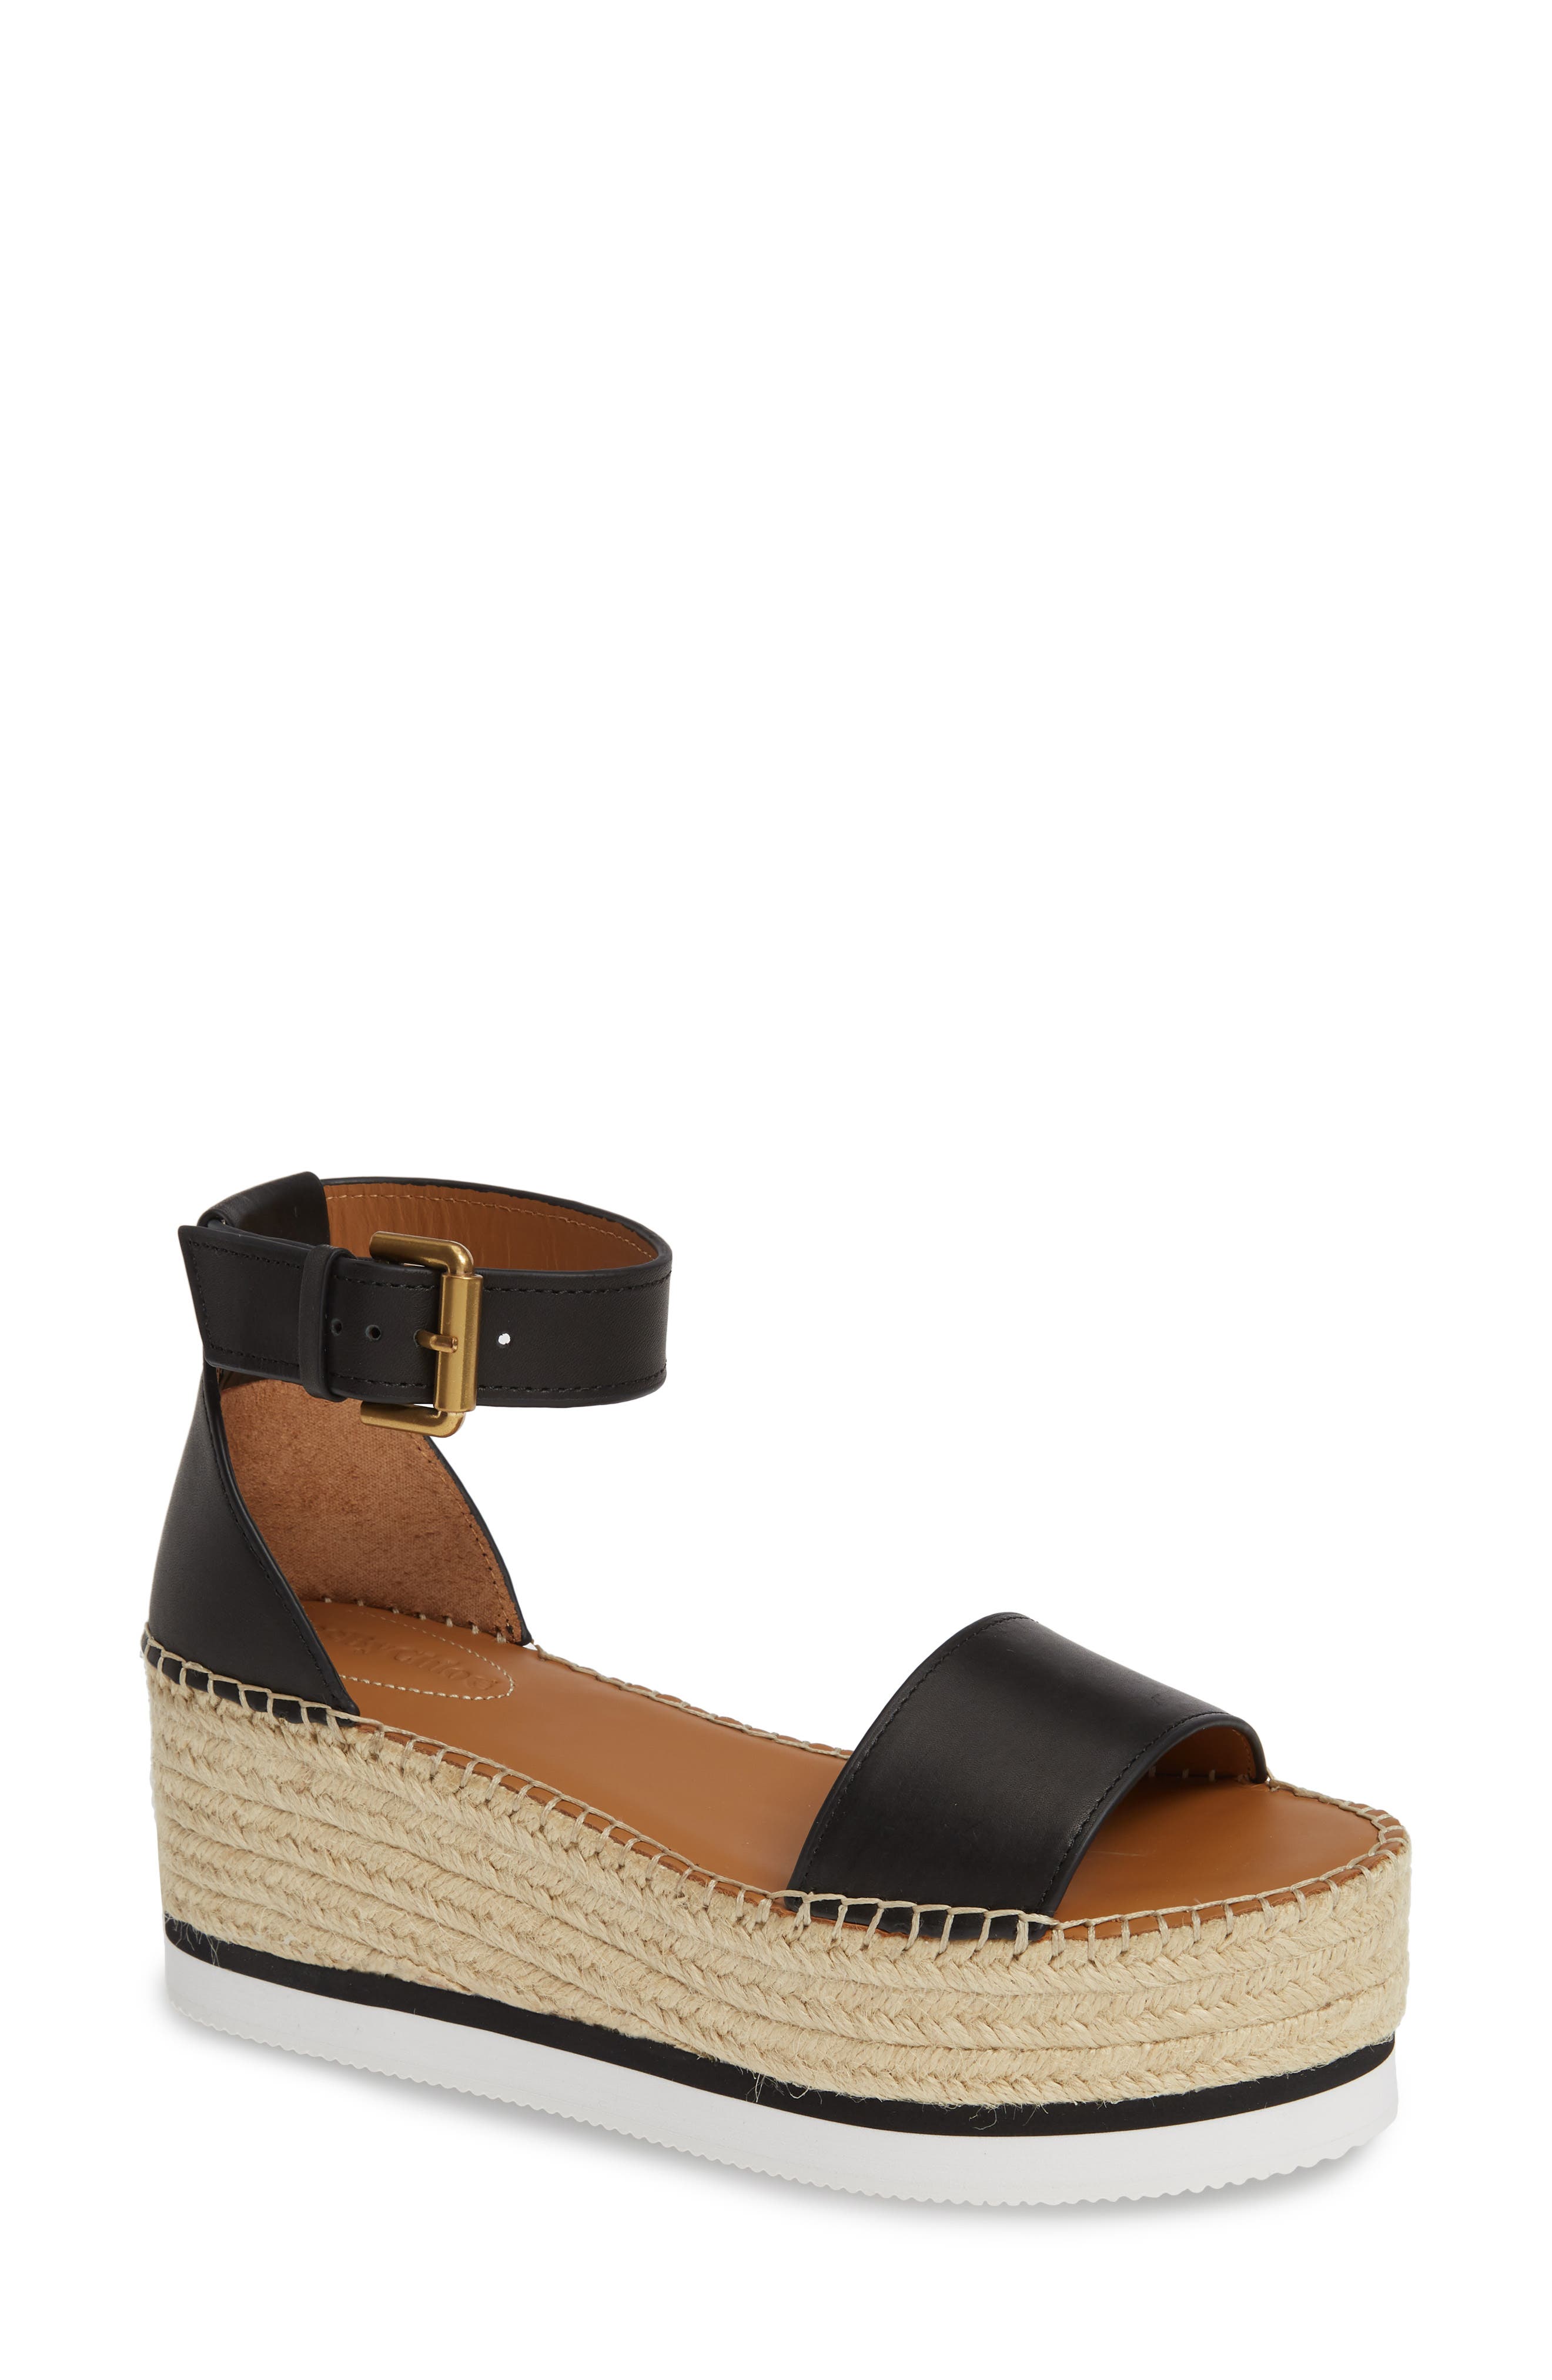 See by Chloé Espadrilles for Women 